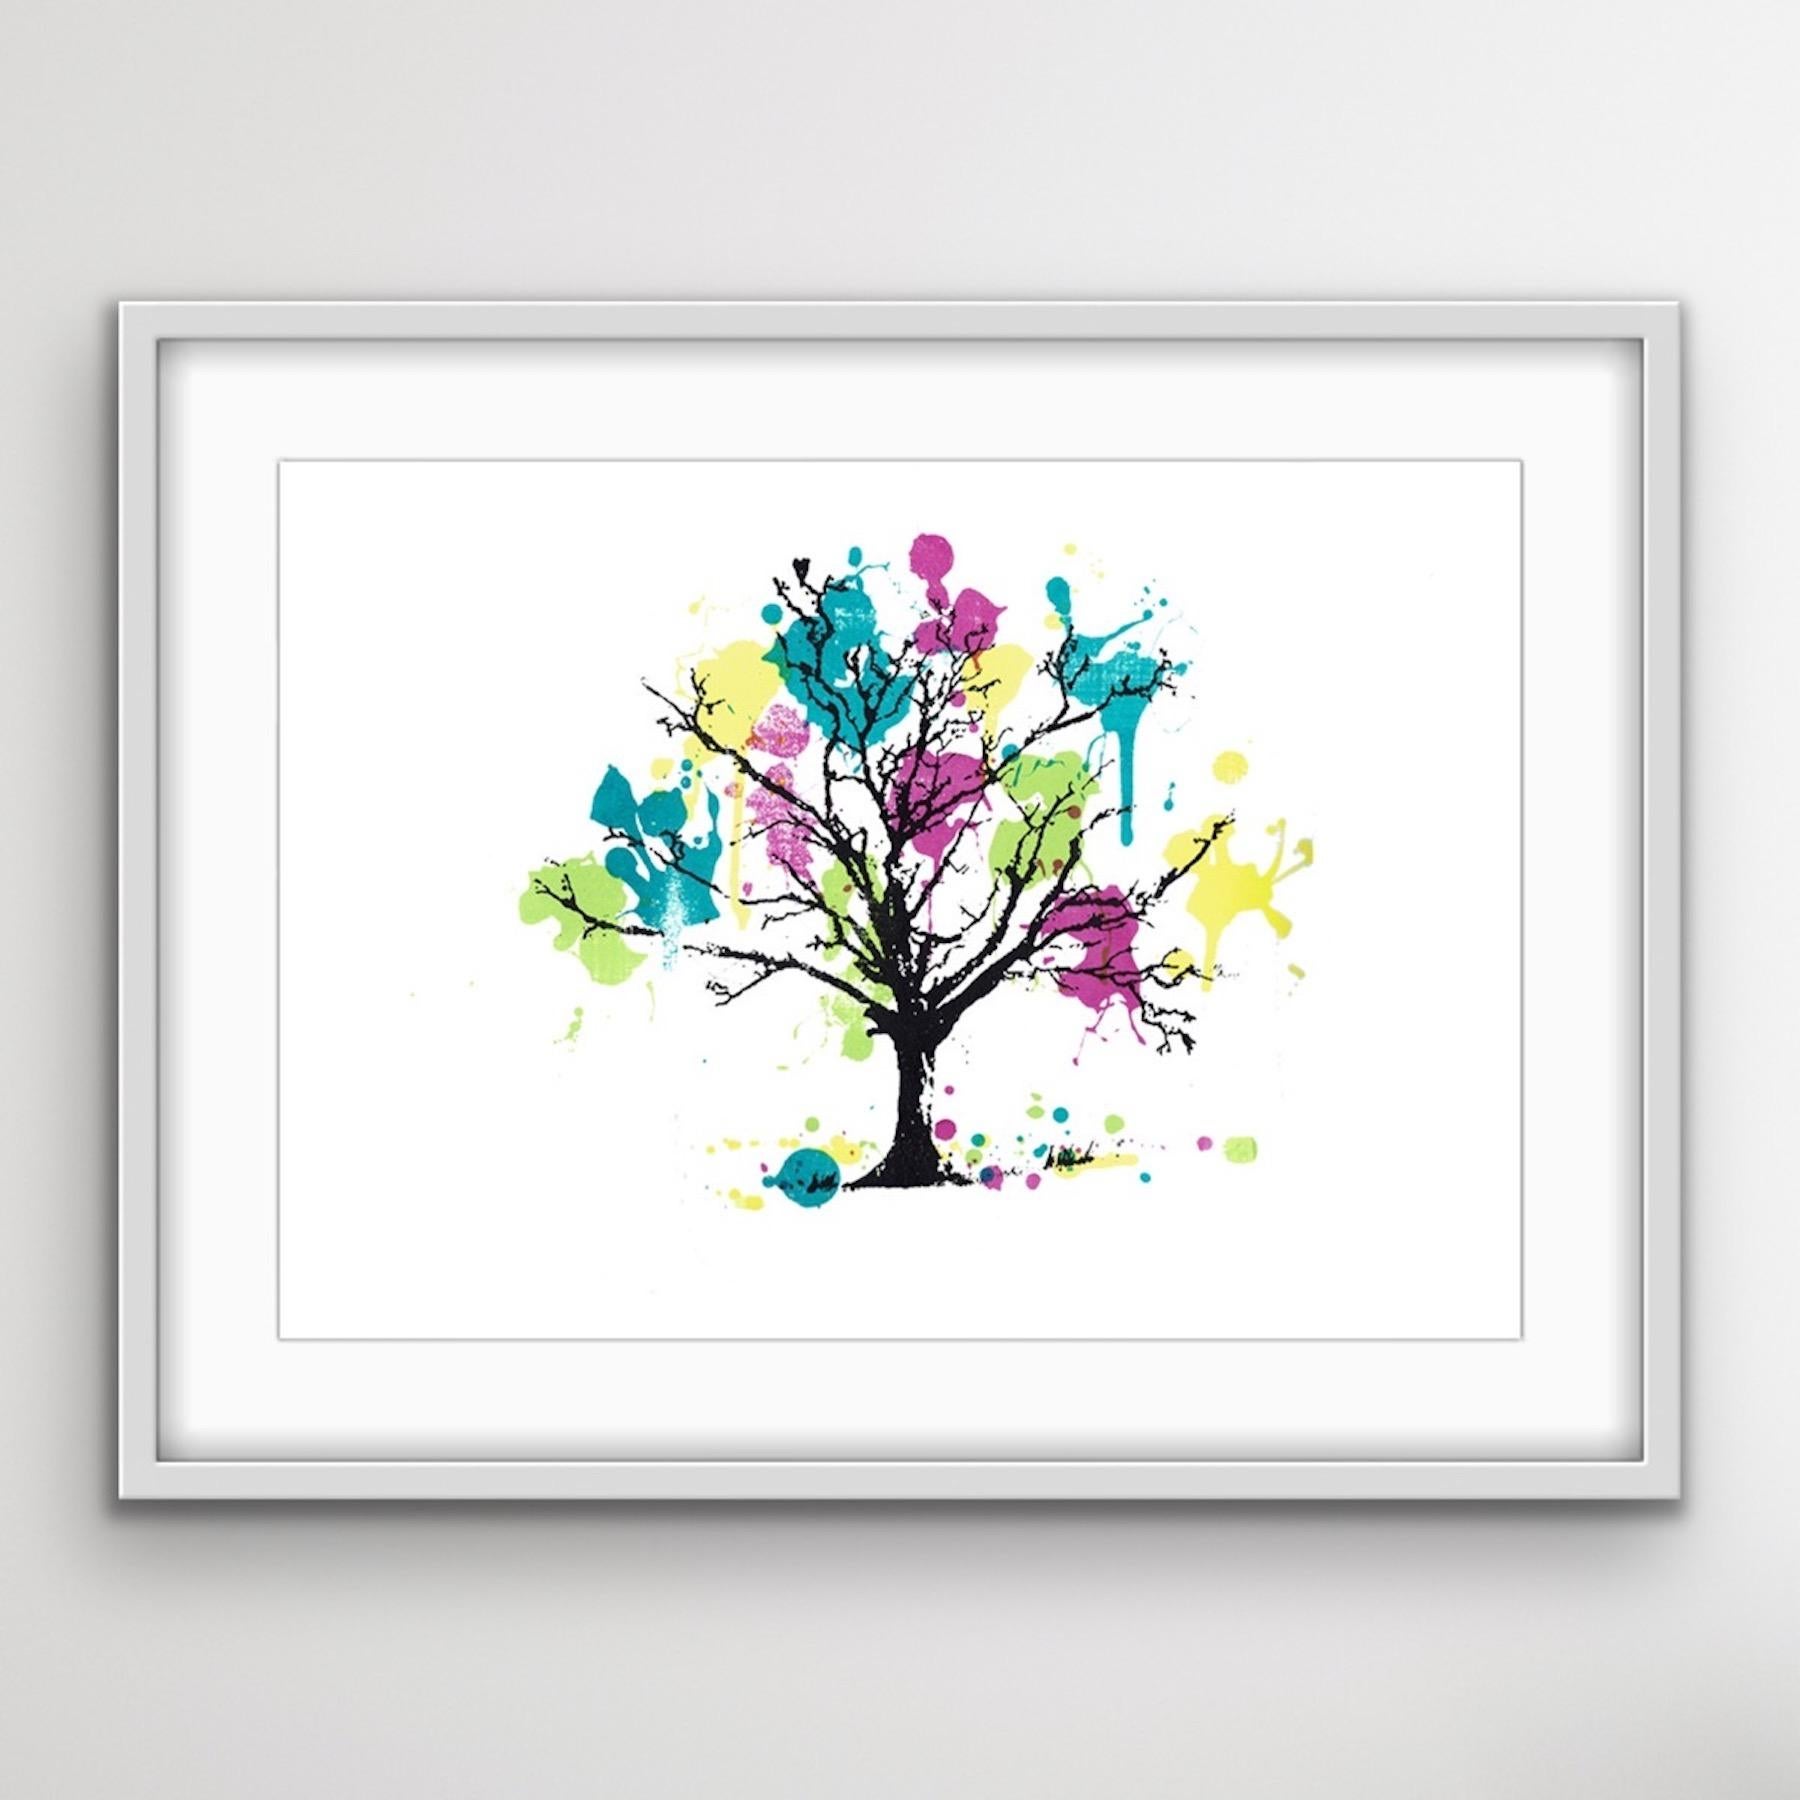 Blooming Colourful, Bright Tree Art, Pop art style print, handmade print - Contemporary Print by Katie Edwards